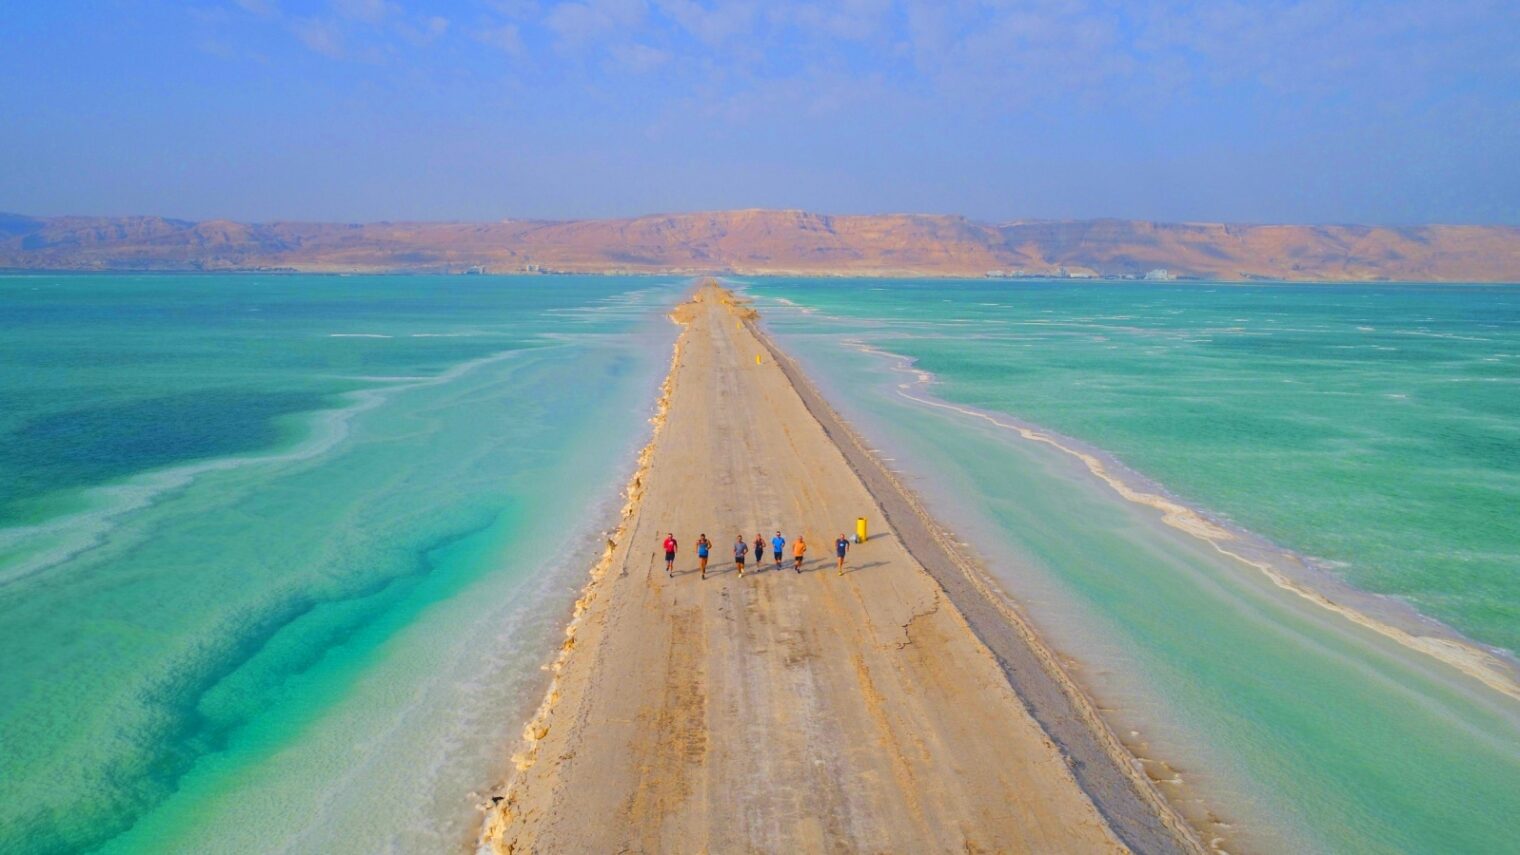 Overview of the Dead Sea Marathon. Photo by Elements